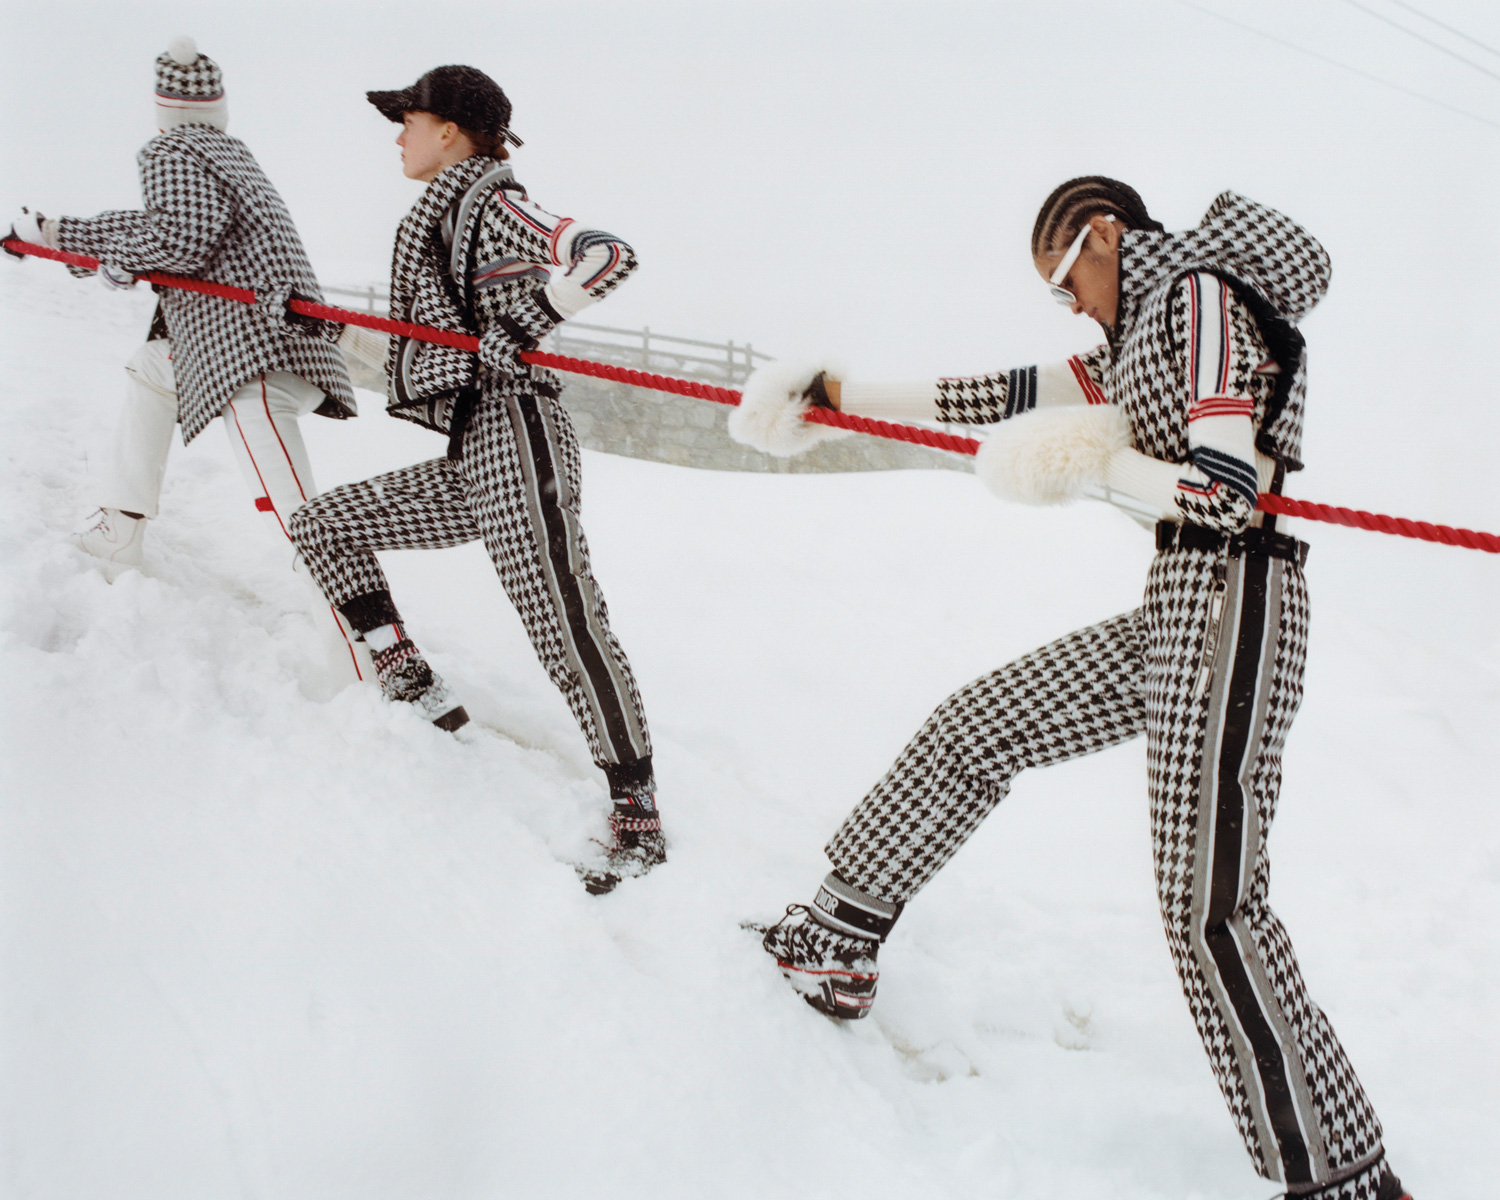 The best luxury accessories you need this ski season